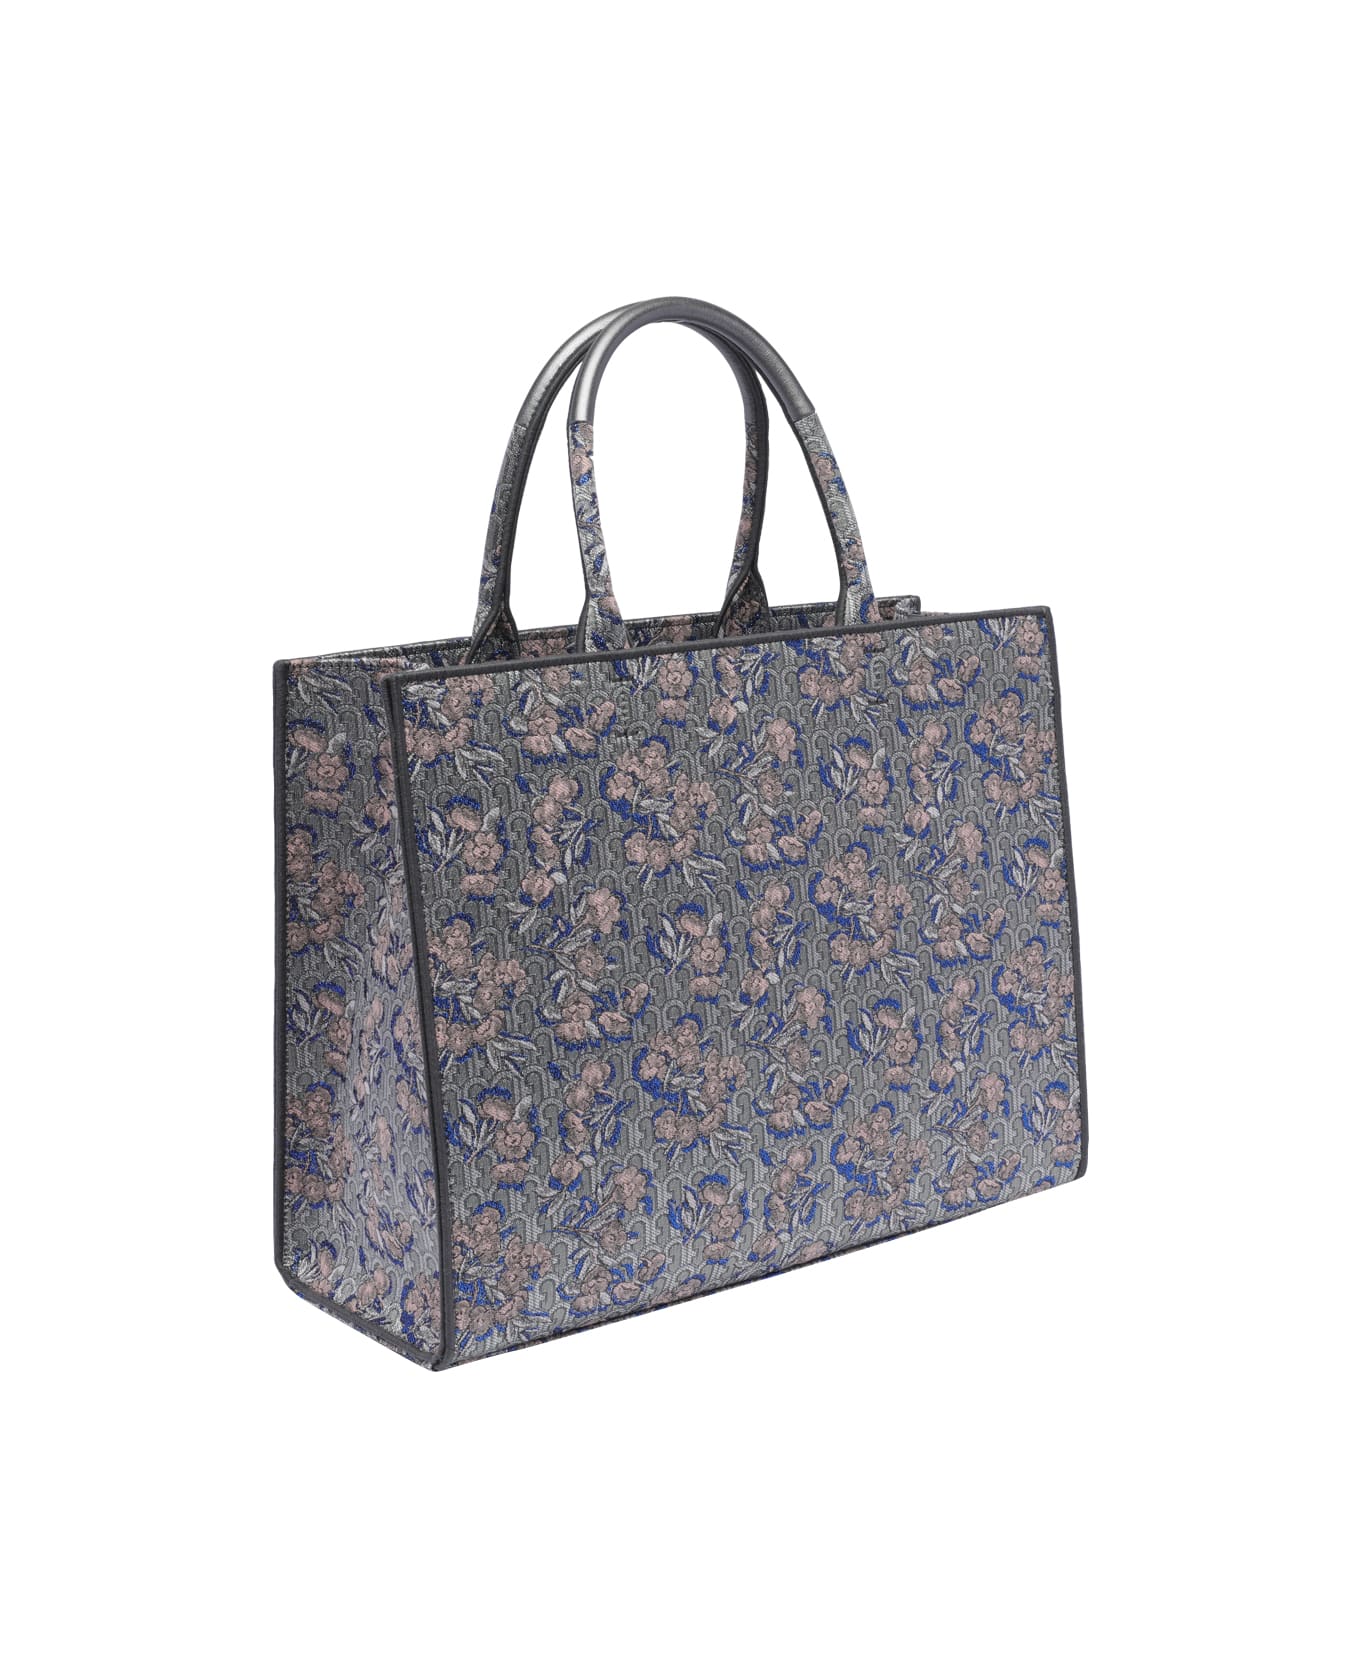 Furla Opportunity Shopping Bag - Silver トートバッグ